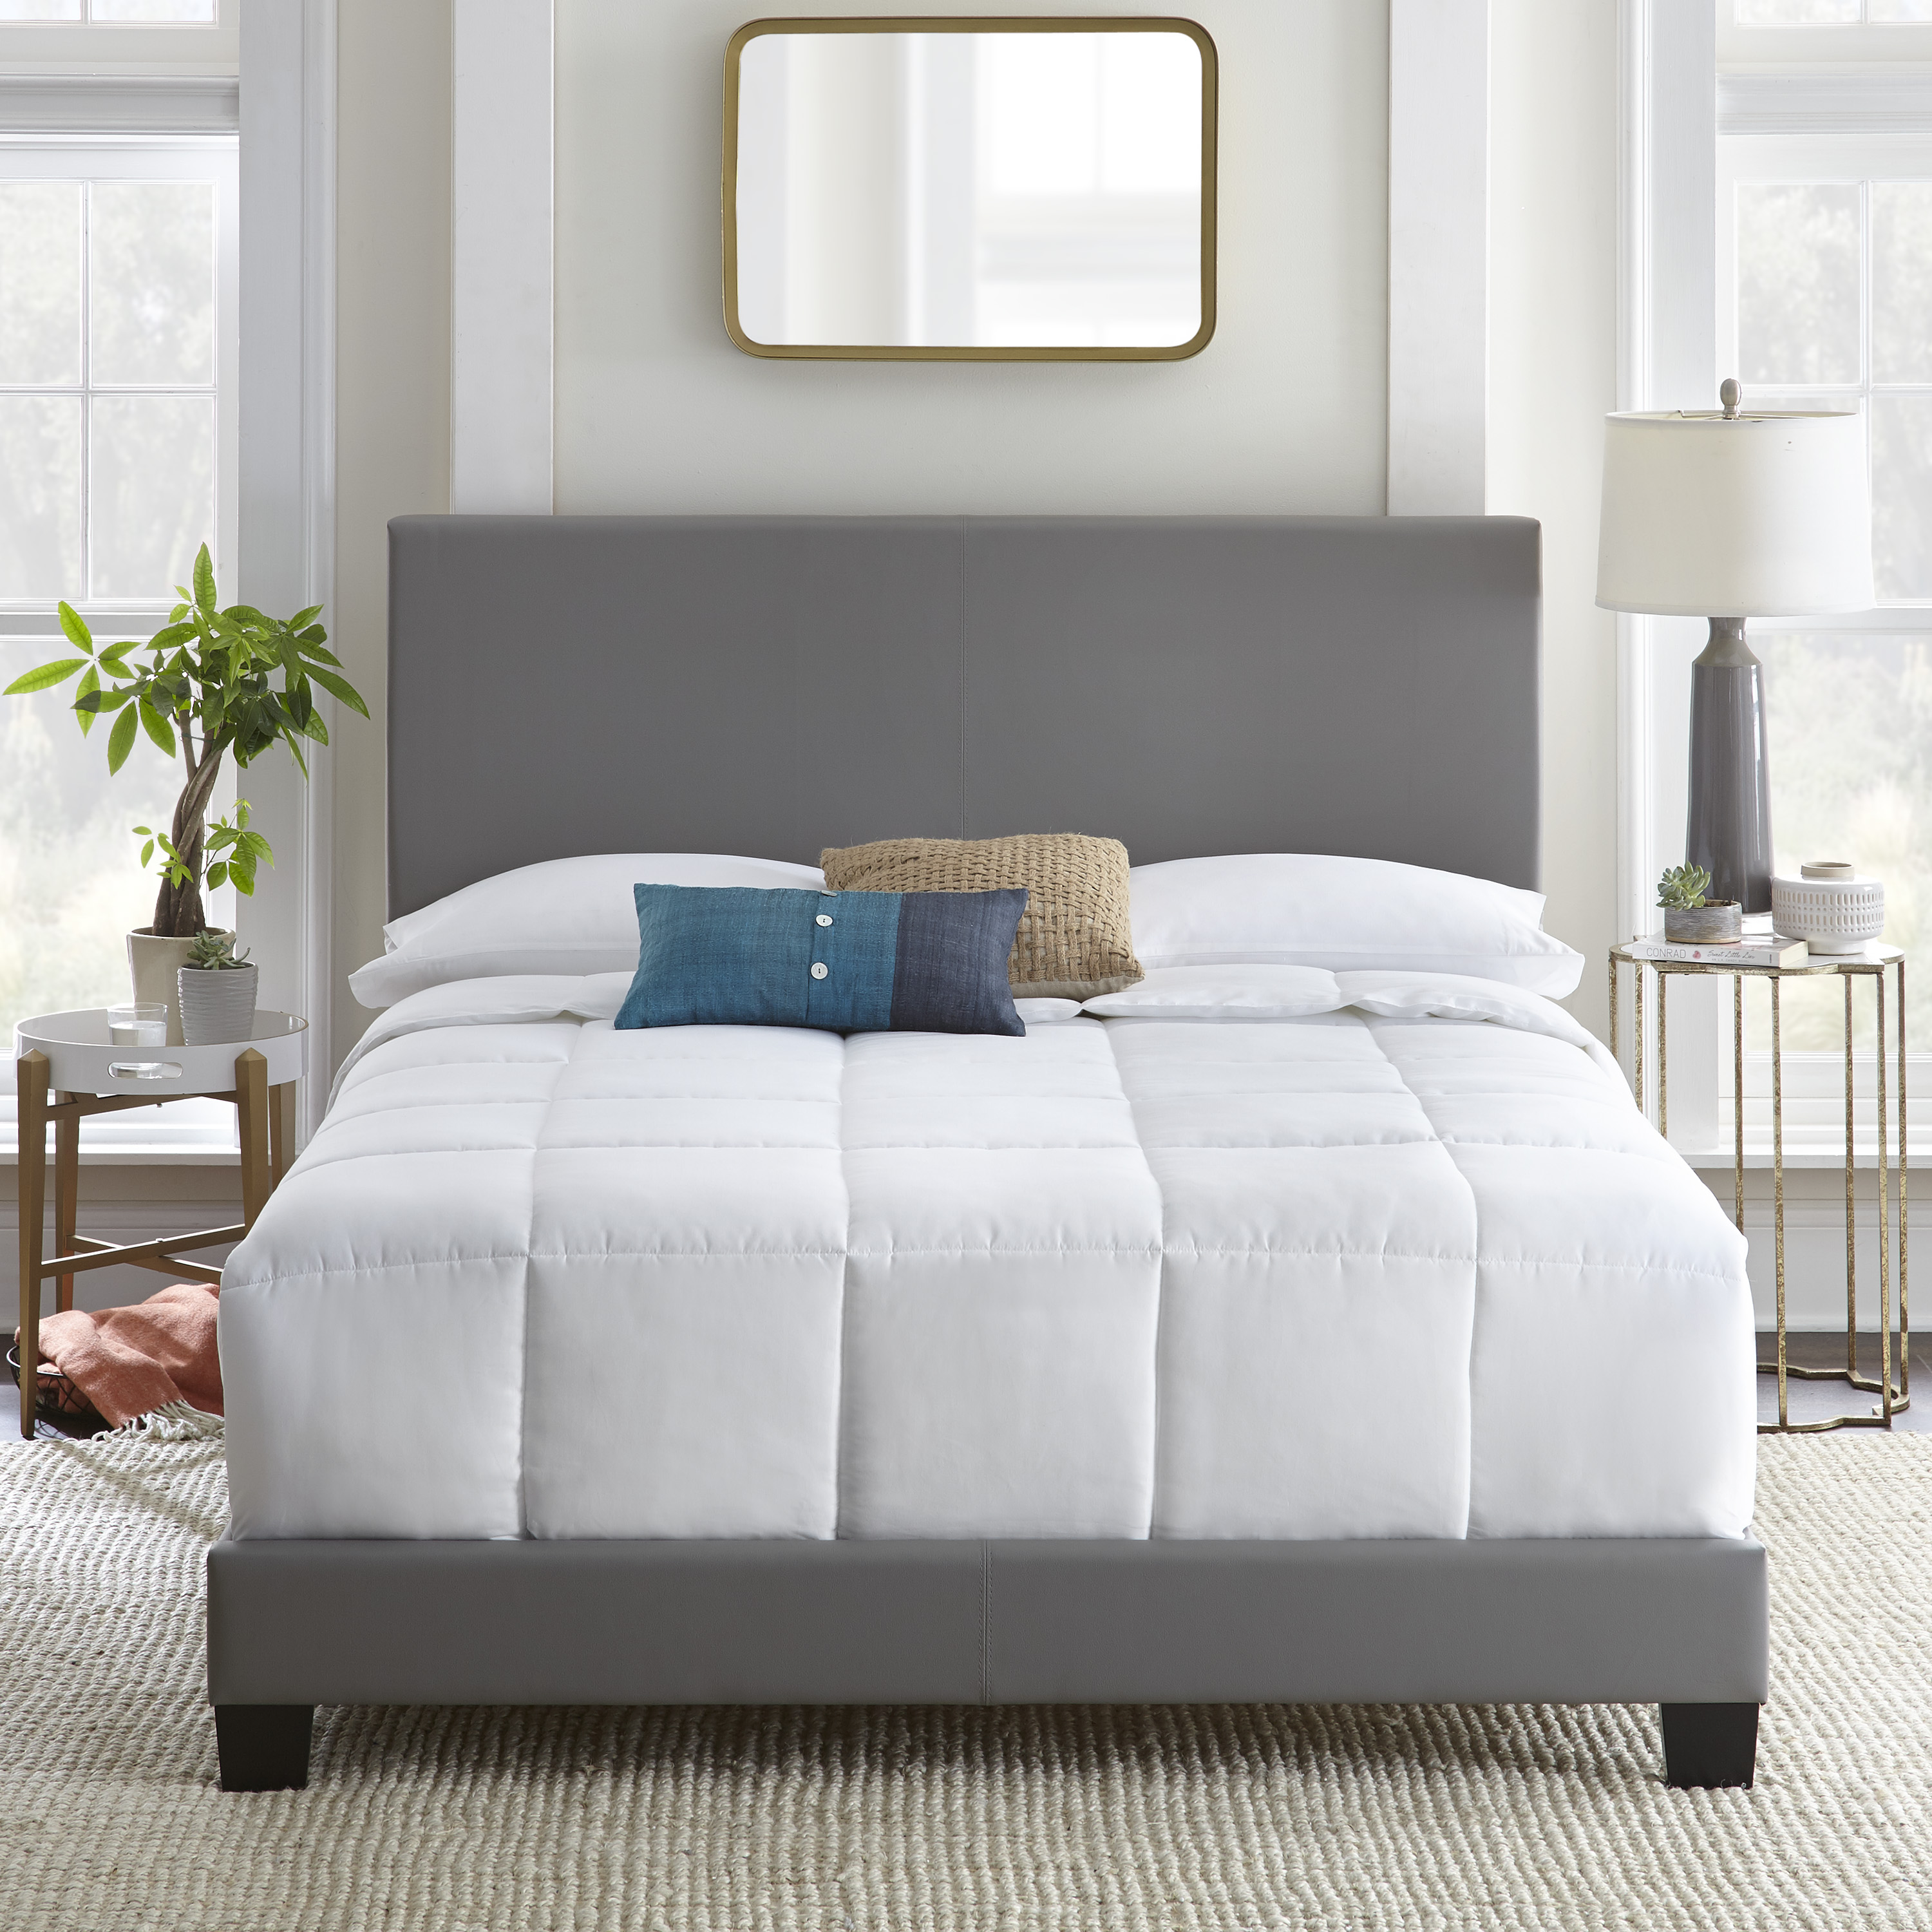 Boyd Sleep Florence King Upholstered Platform Bed, Box Spring Required, Gray Faux Leather - image 1 of 10